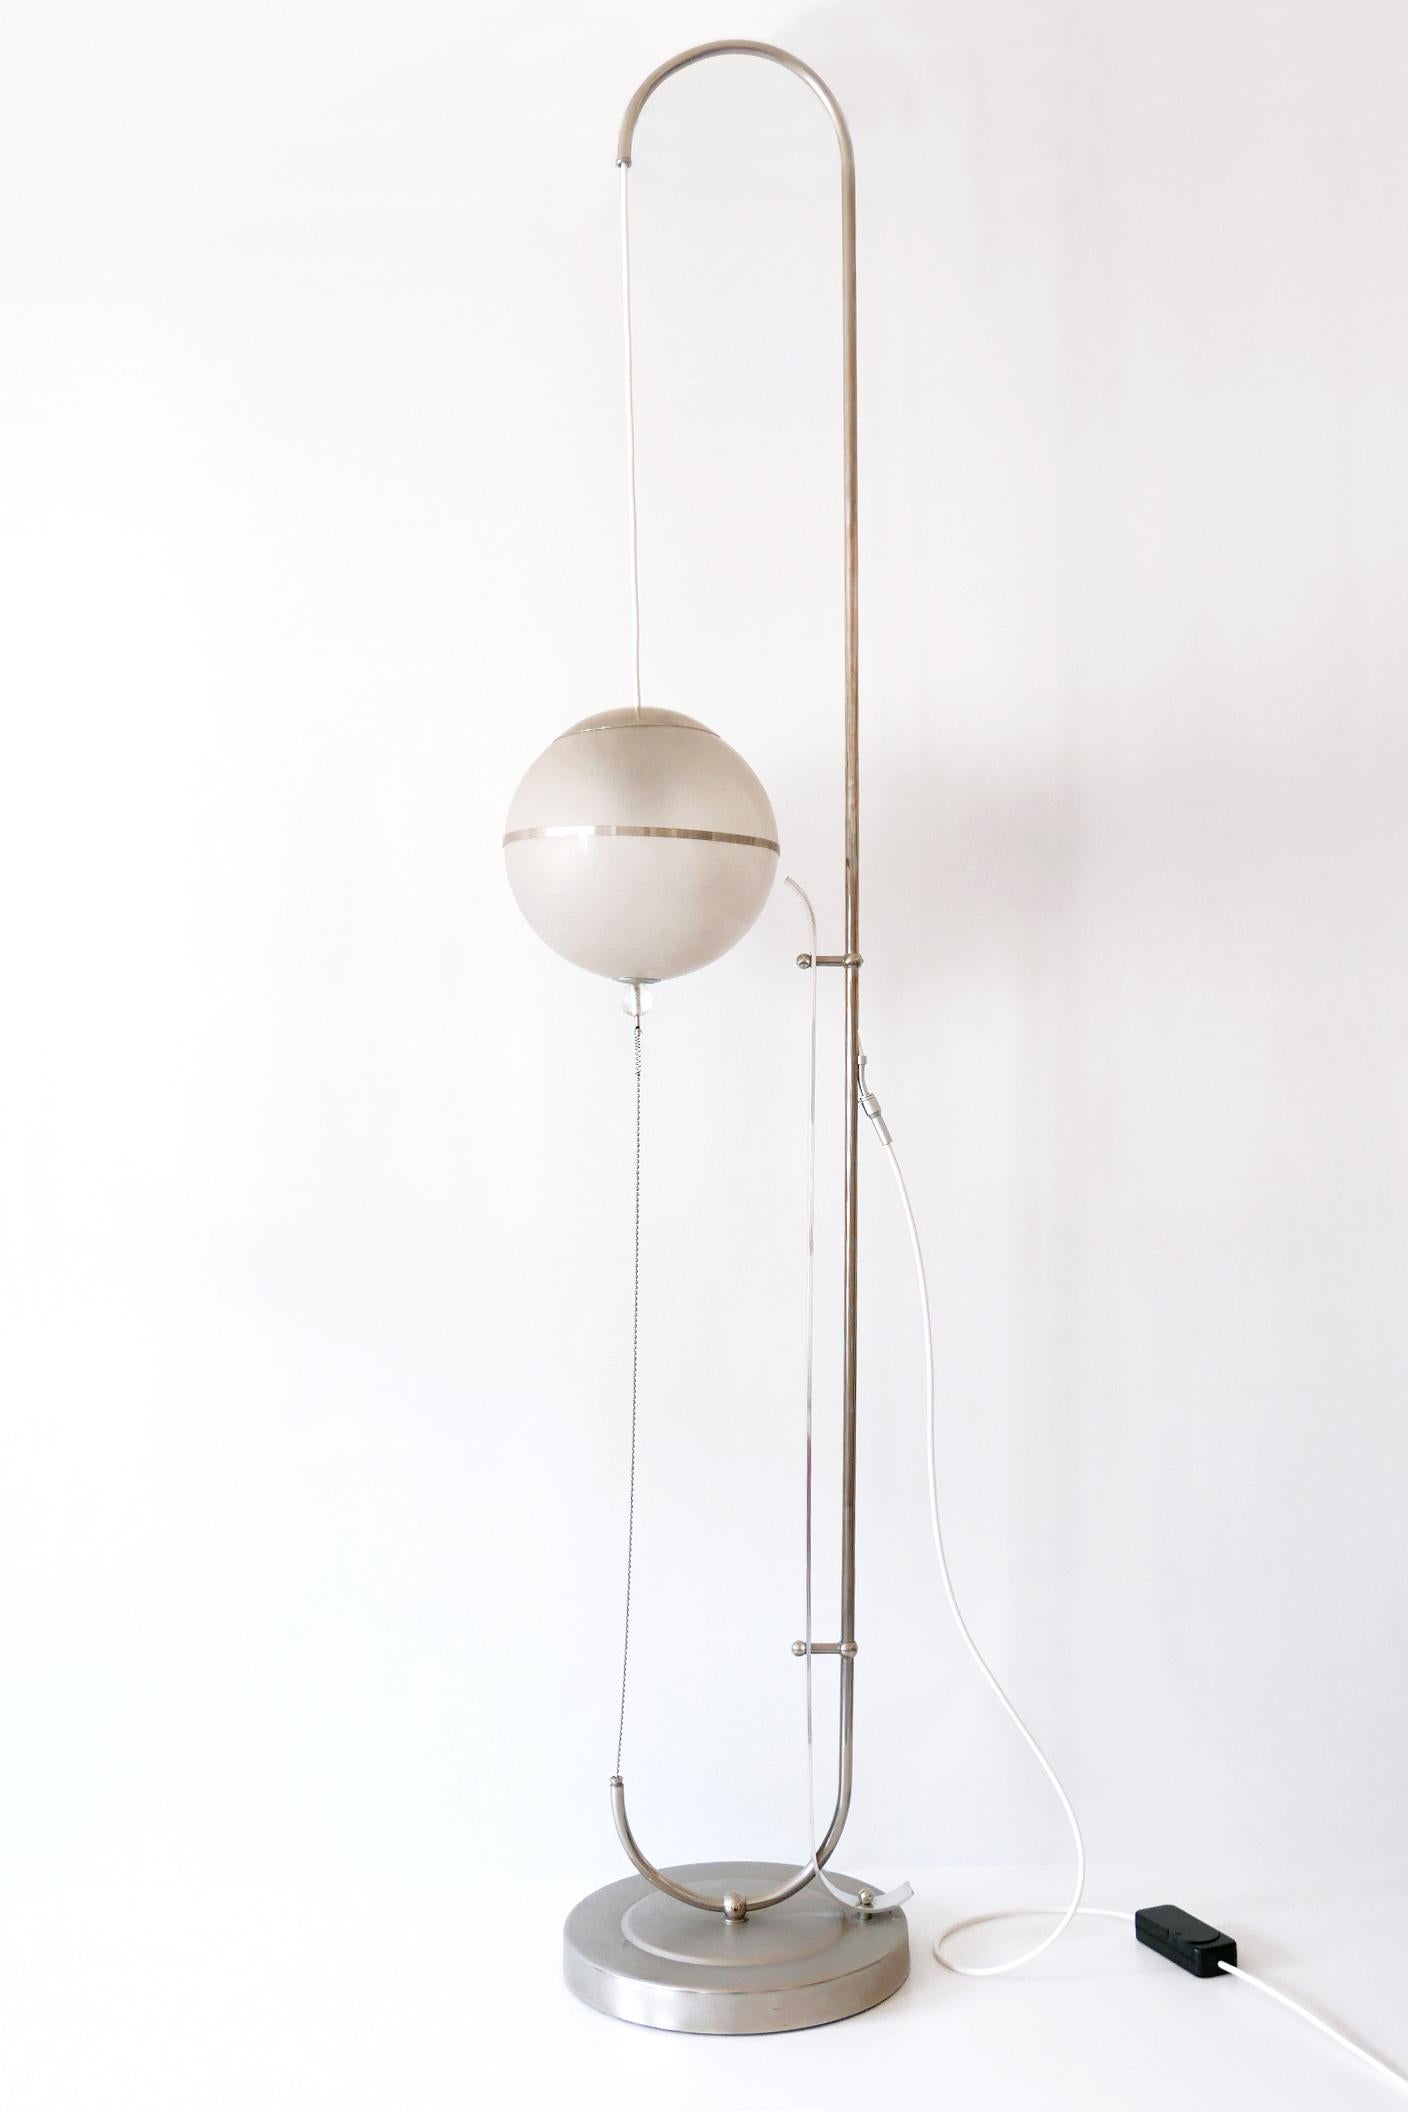 Mid-20th Century Bauhaus Floor Lamp by Karl Trabert for Schanzenbach & Co 1930s Germany For Sale